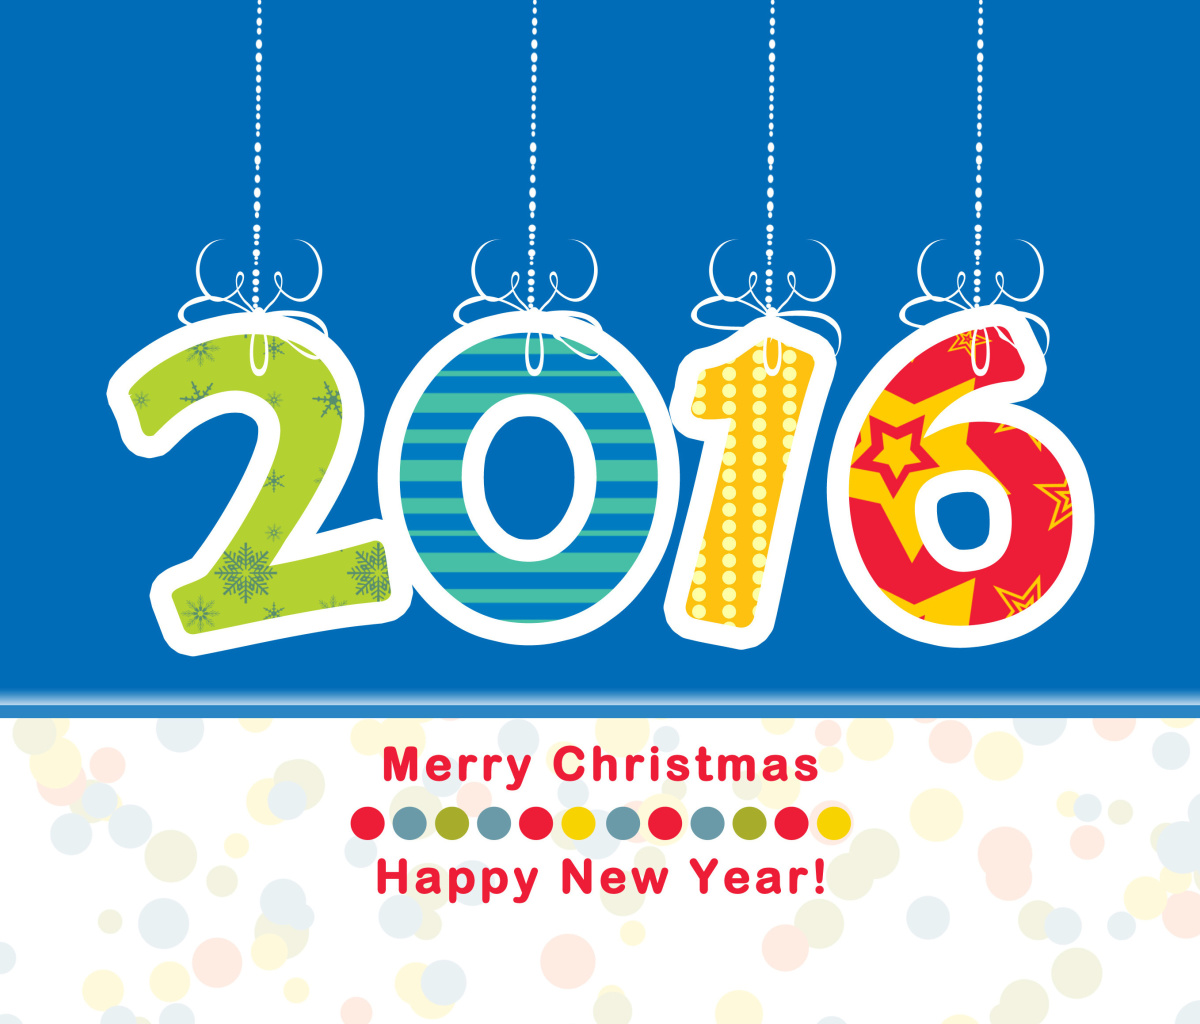 Colorful New Year 2016 Greetings wallpaper 1200x1024